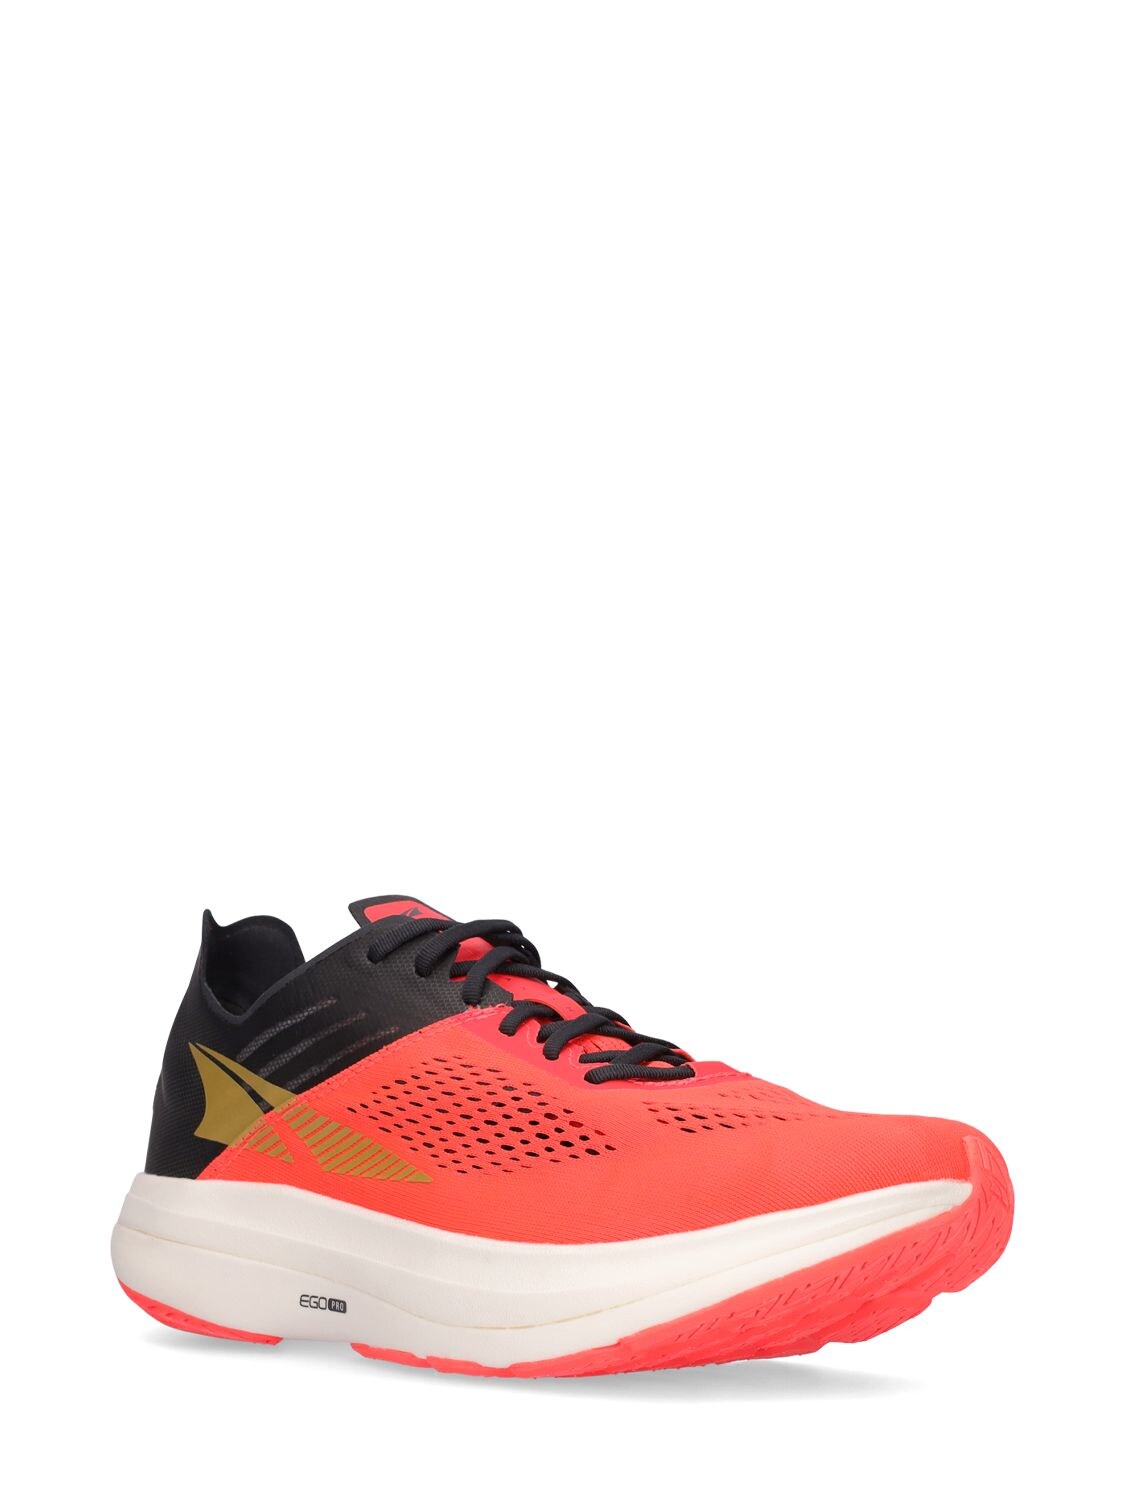 Altra Running Vanish Carbon Running Sneakers In Coral,black | ModeSens